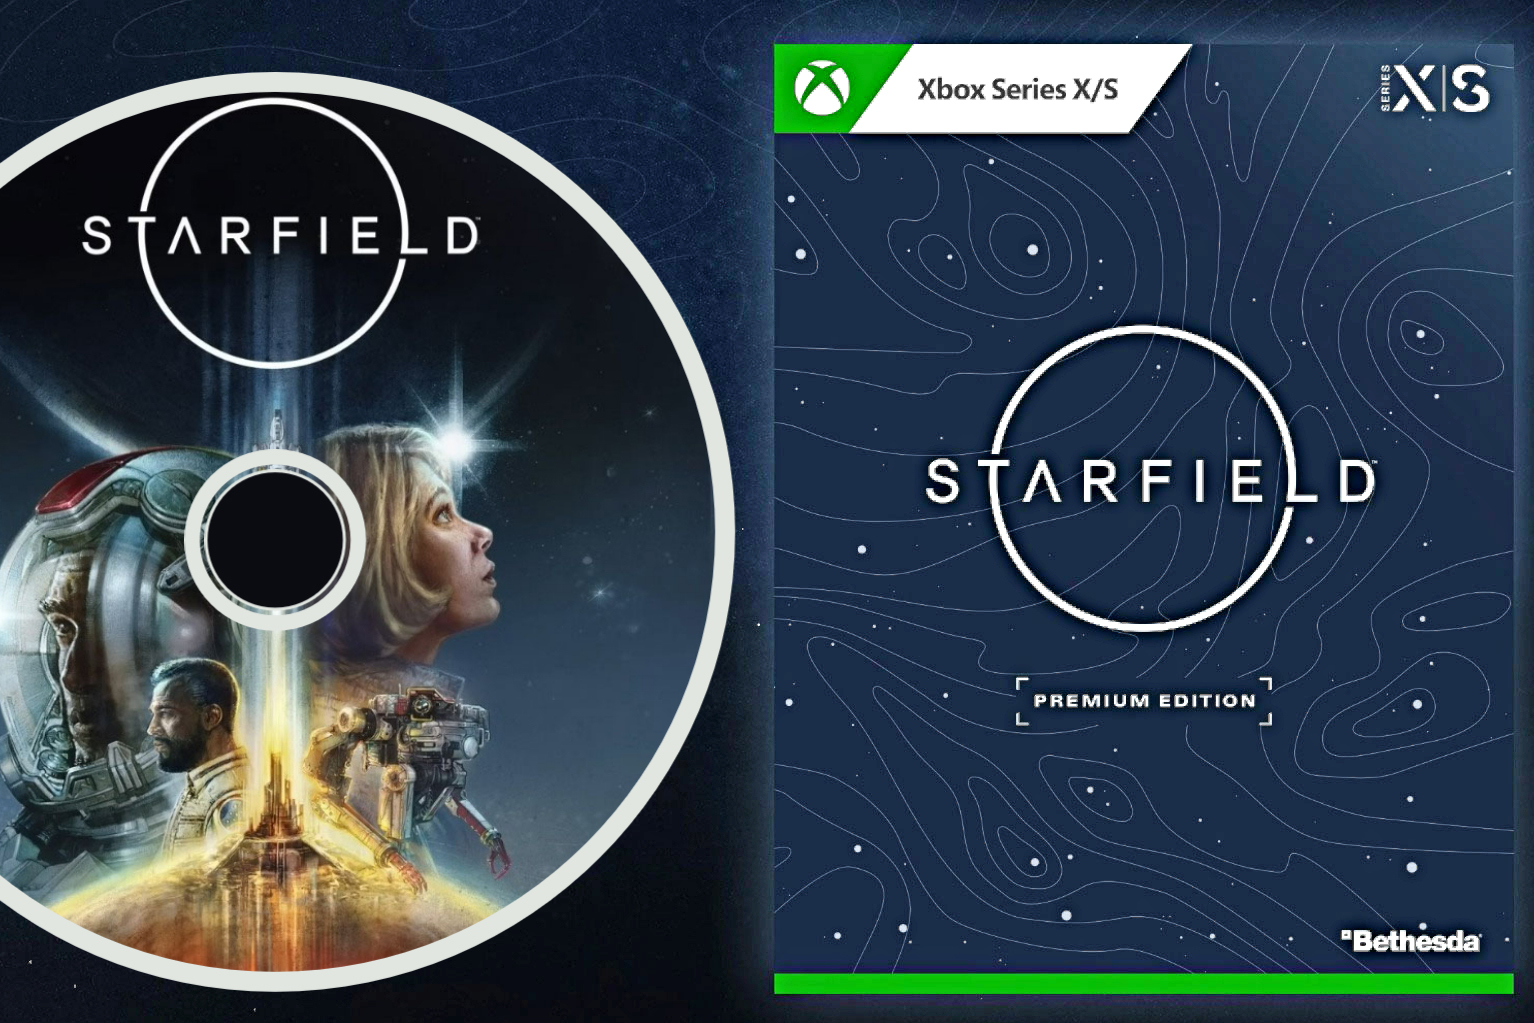 Walmart will throw away physical copies of Starfield if they are not purchased for 3 cents each by February 5th